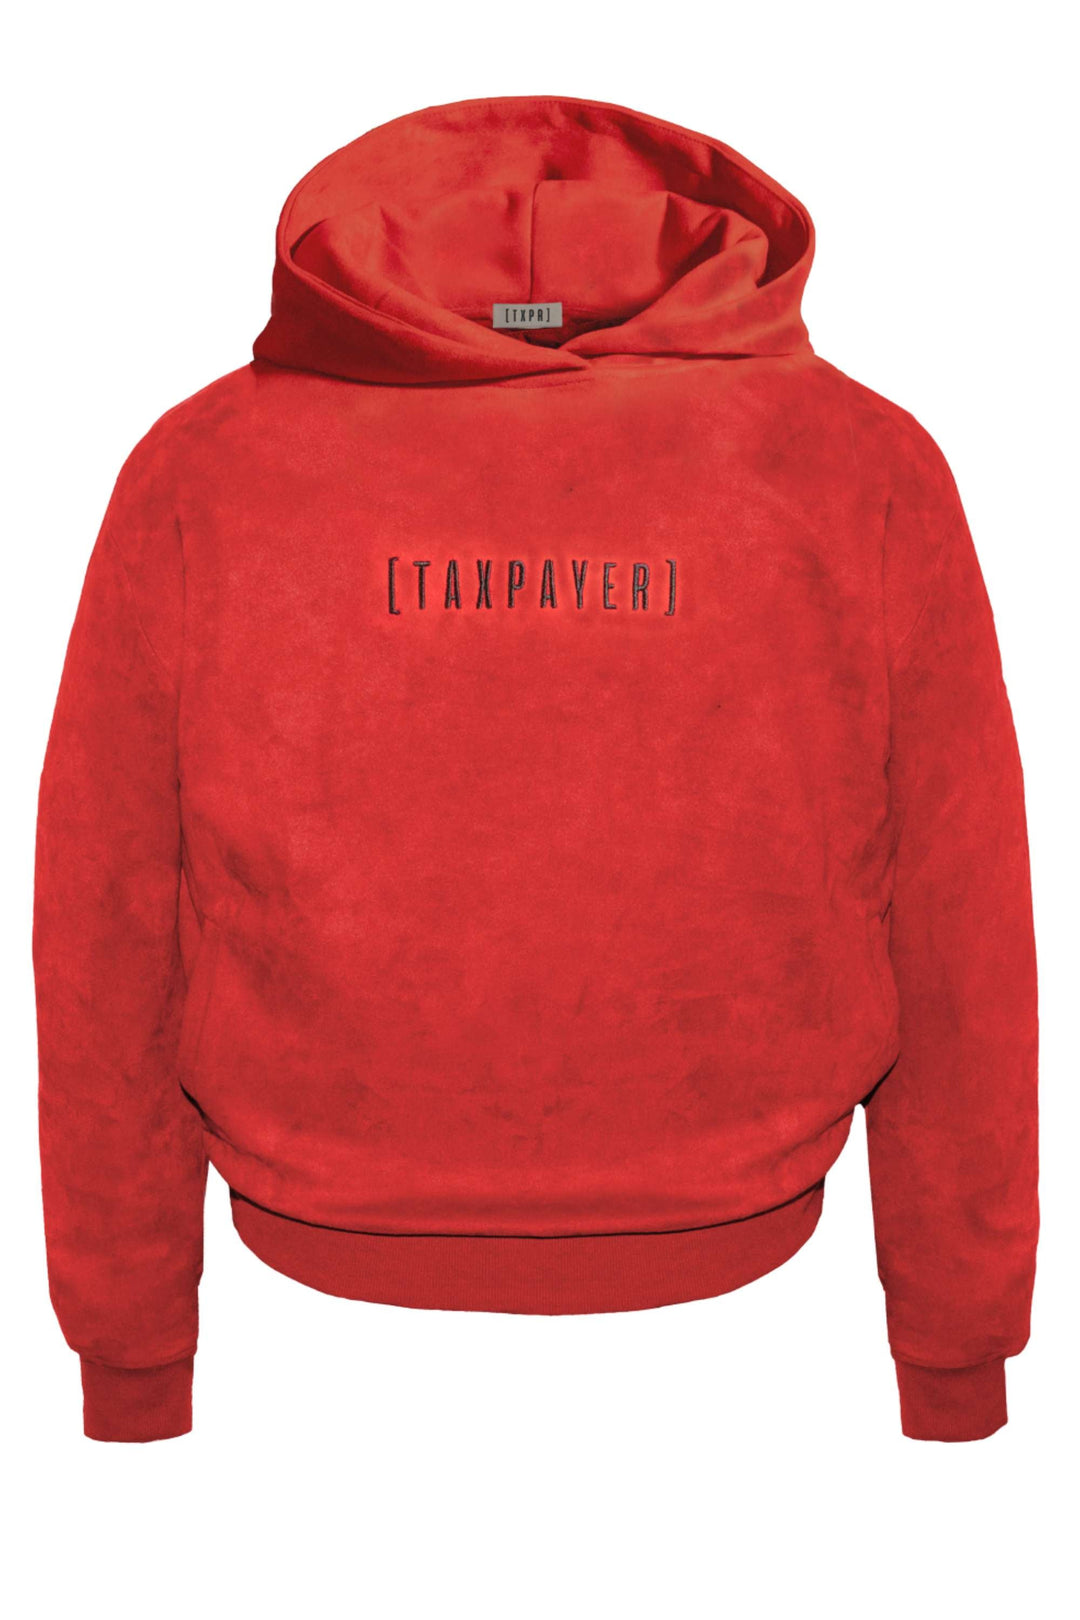 [ TAXPAYER ] ROSE RED SUEDE HOODIE (v) - TAXPAYER